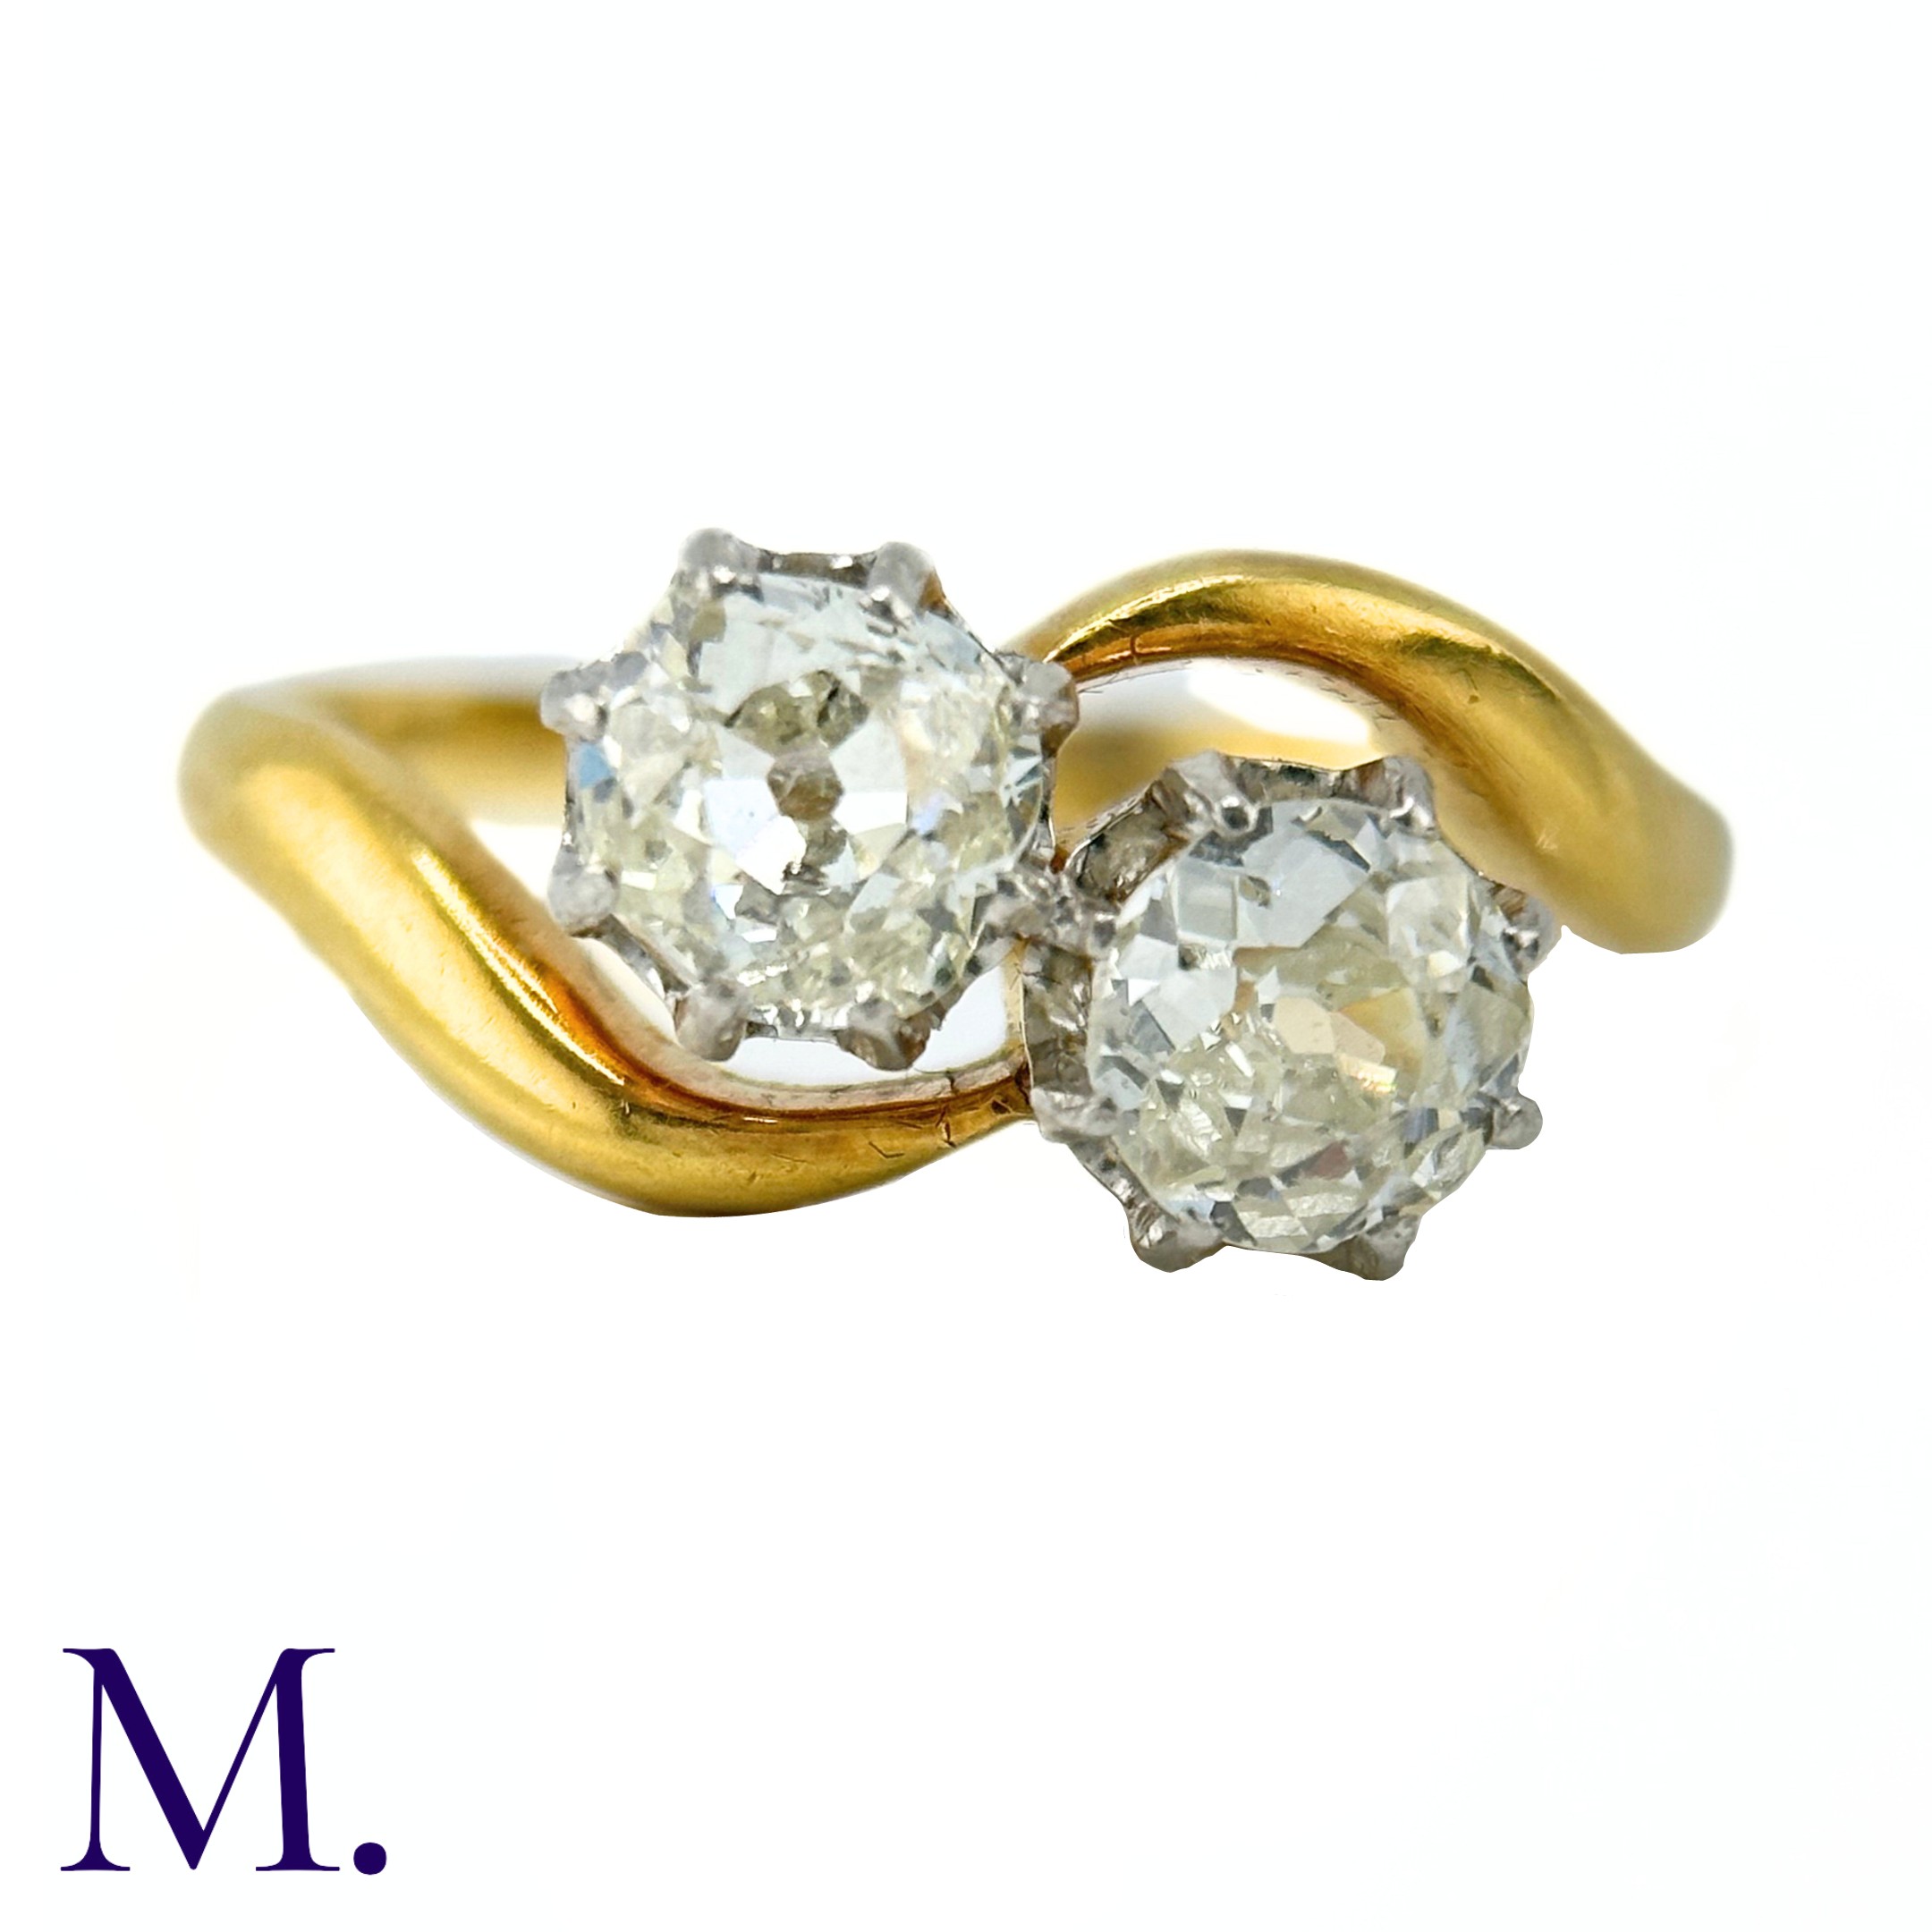 A Diamond Toi et Moi Ring Weight: 3.2g Size: L 0.45 + 0.5ct - Image 5 of 6